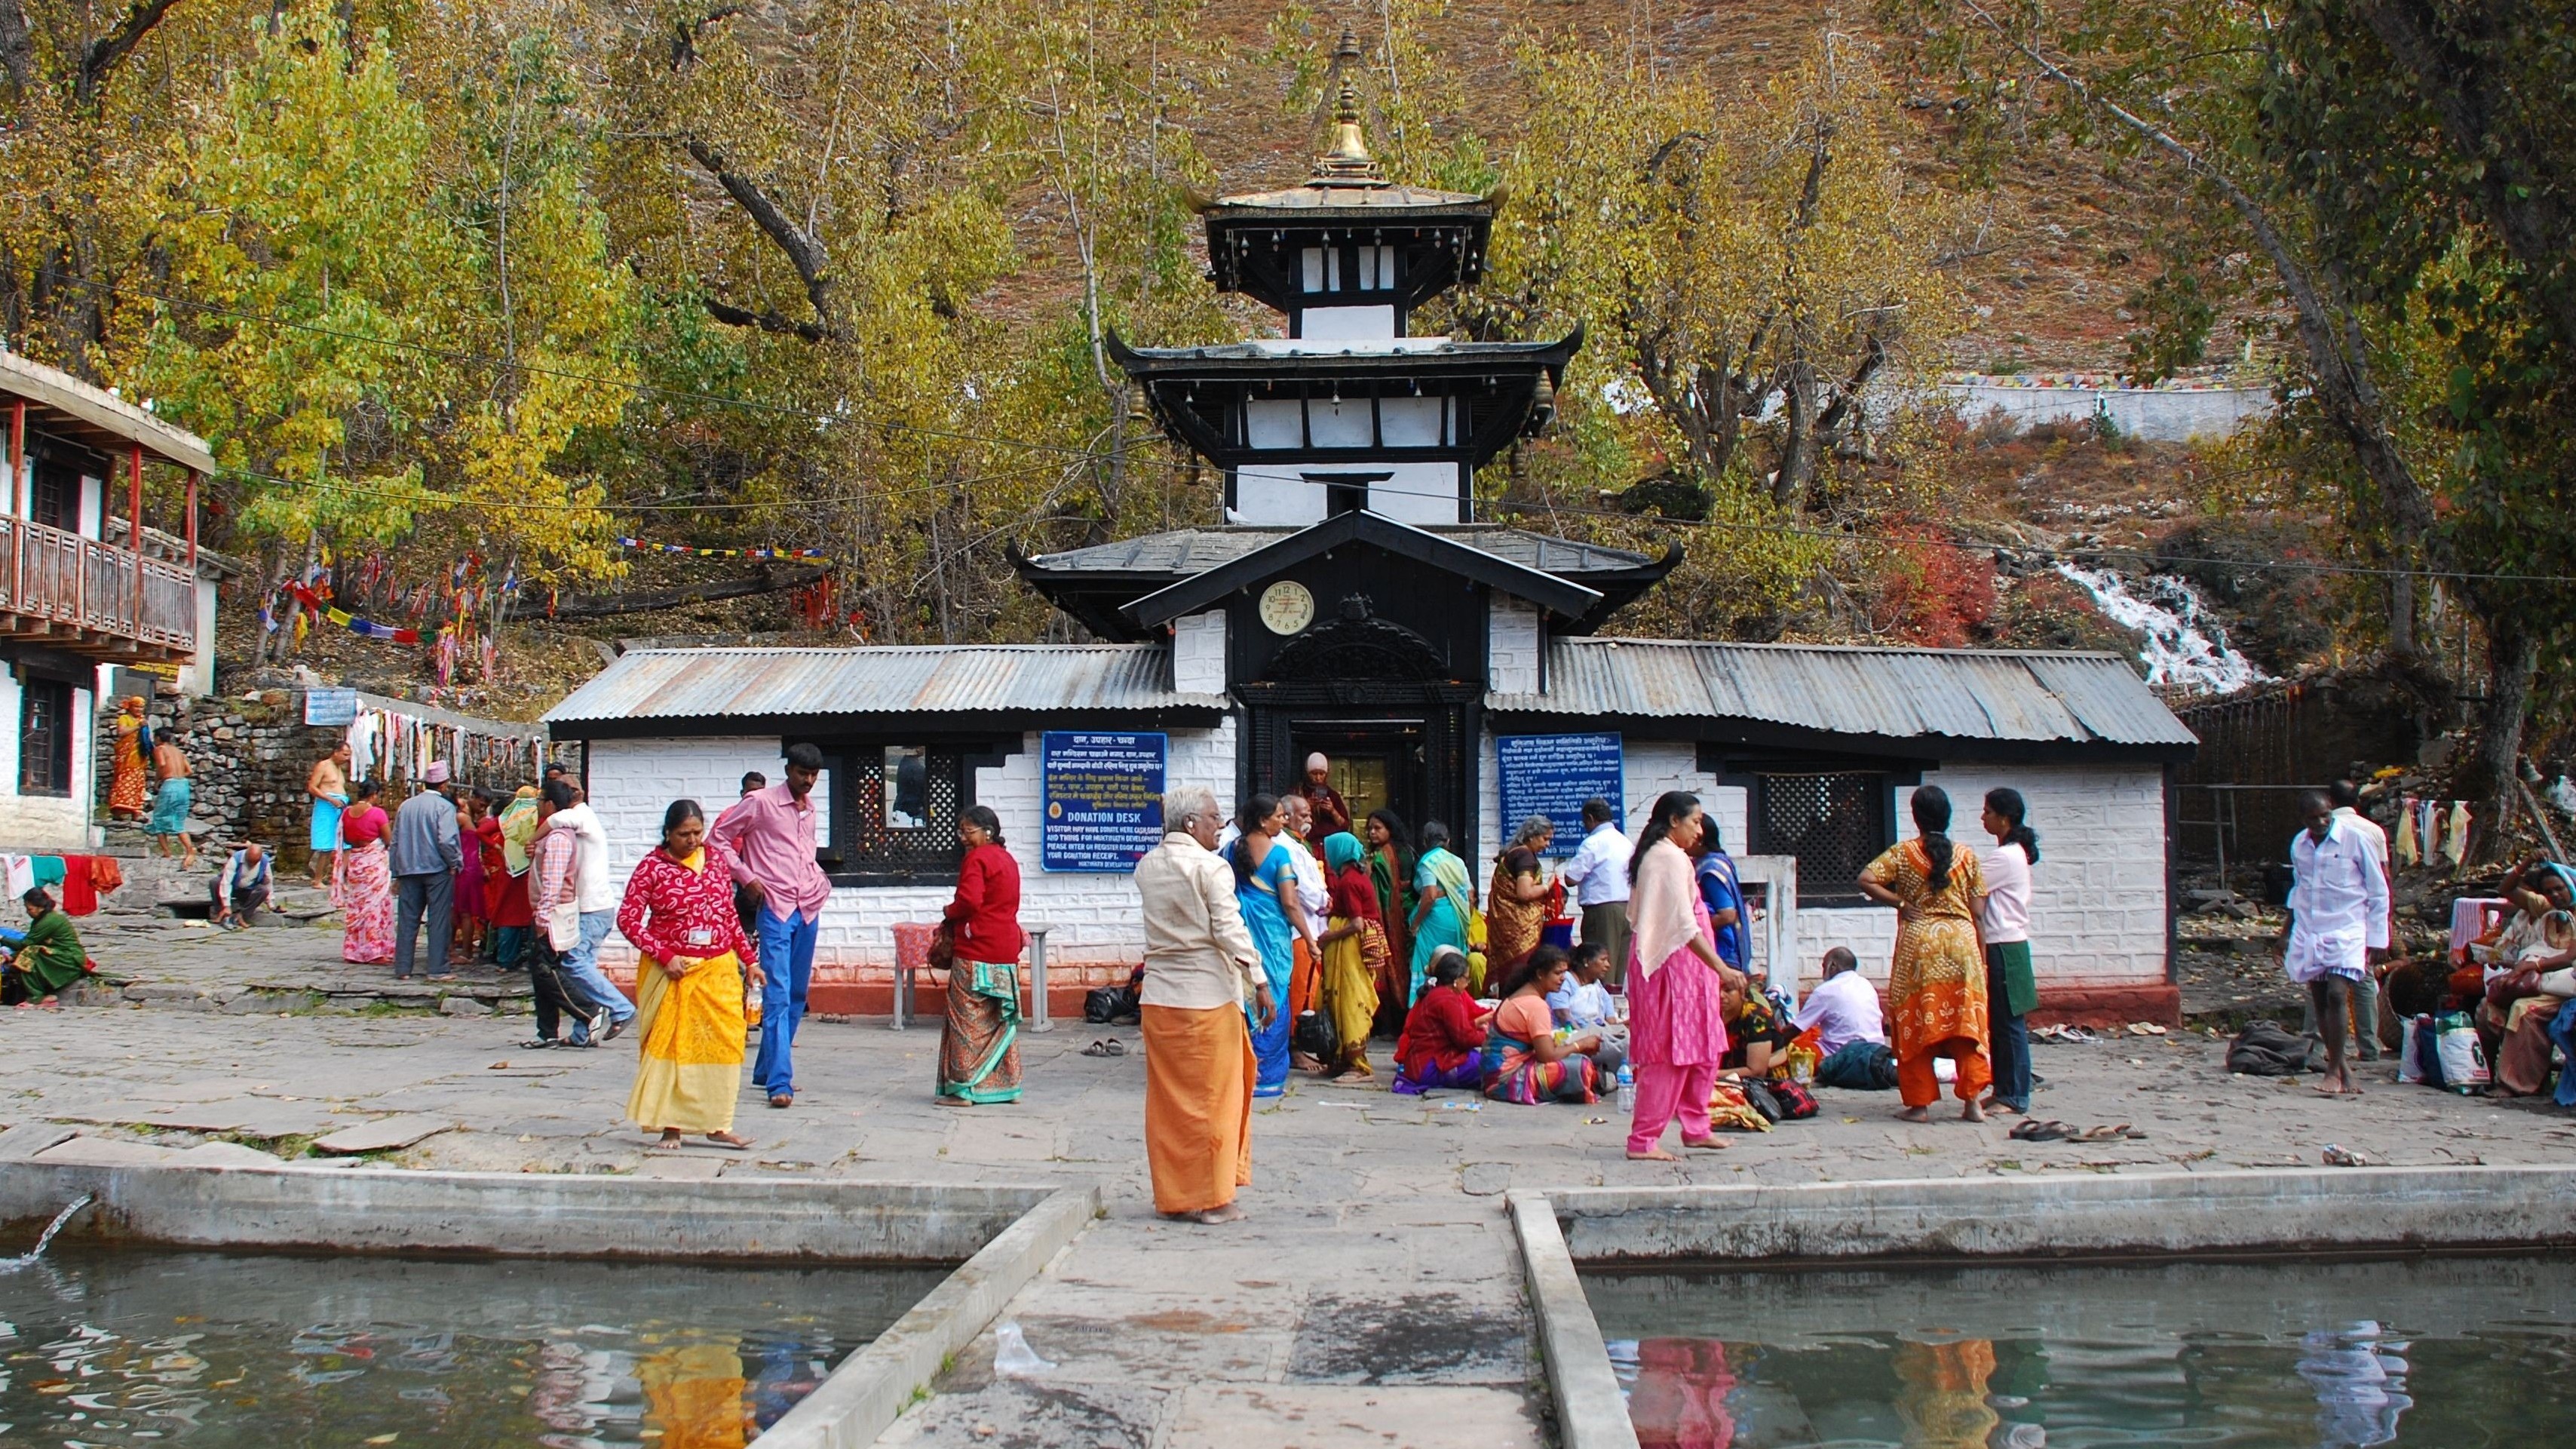 muktinath tour package from pokhara